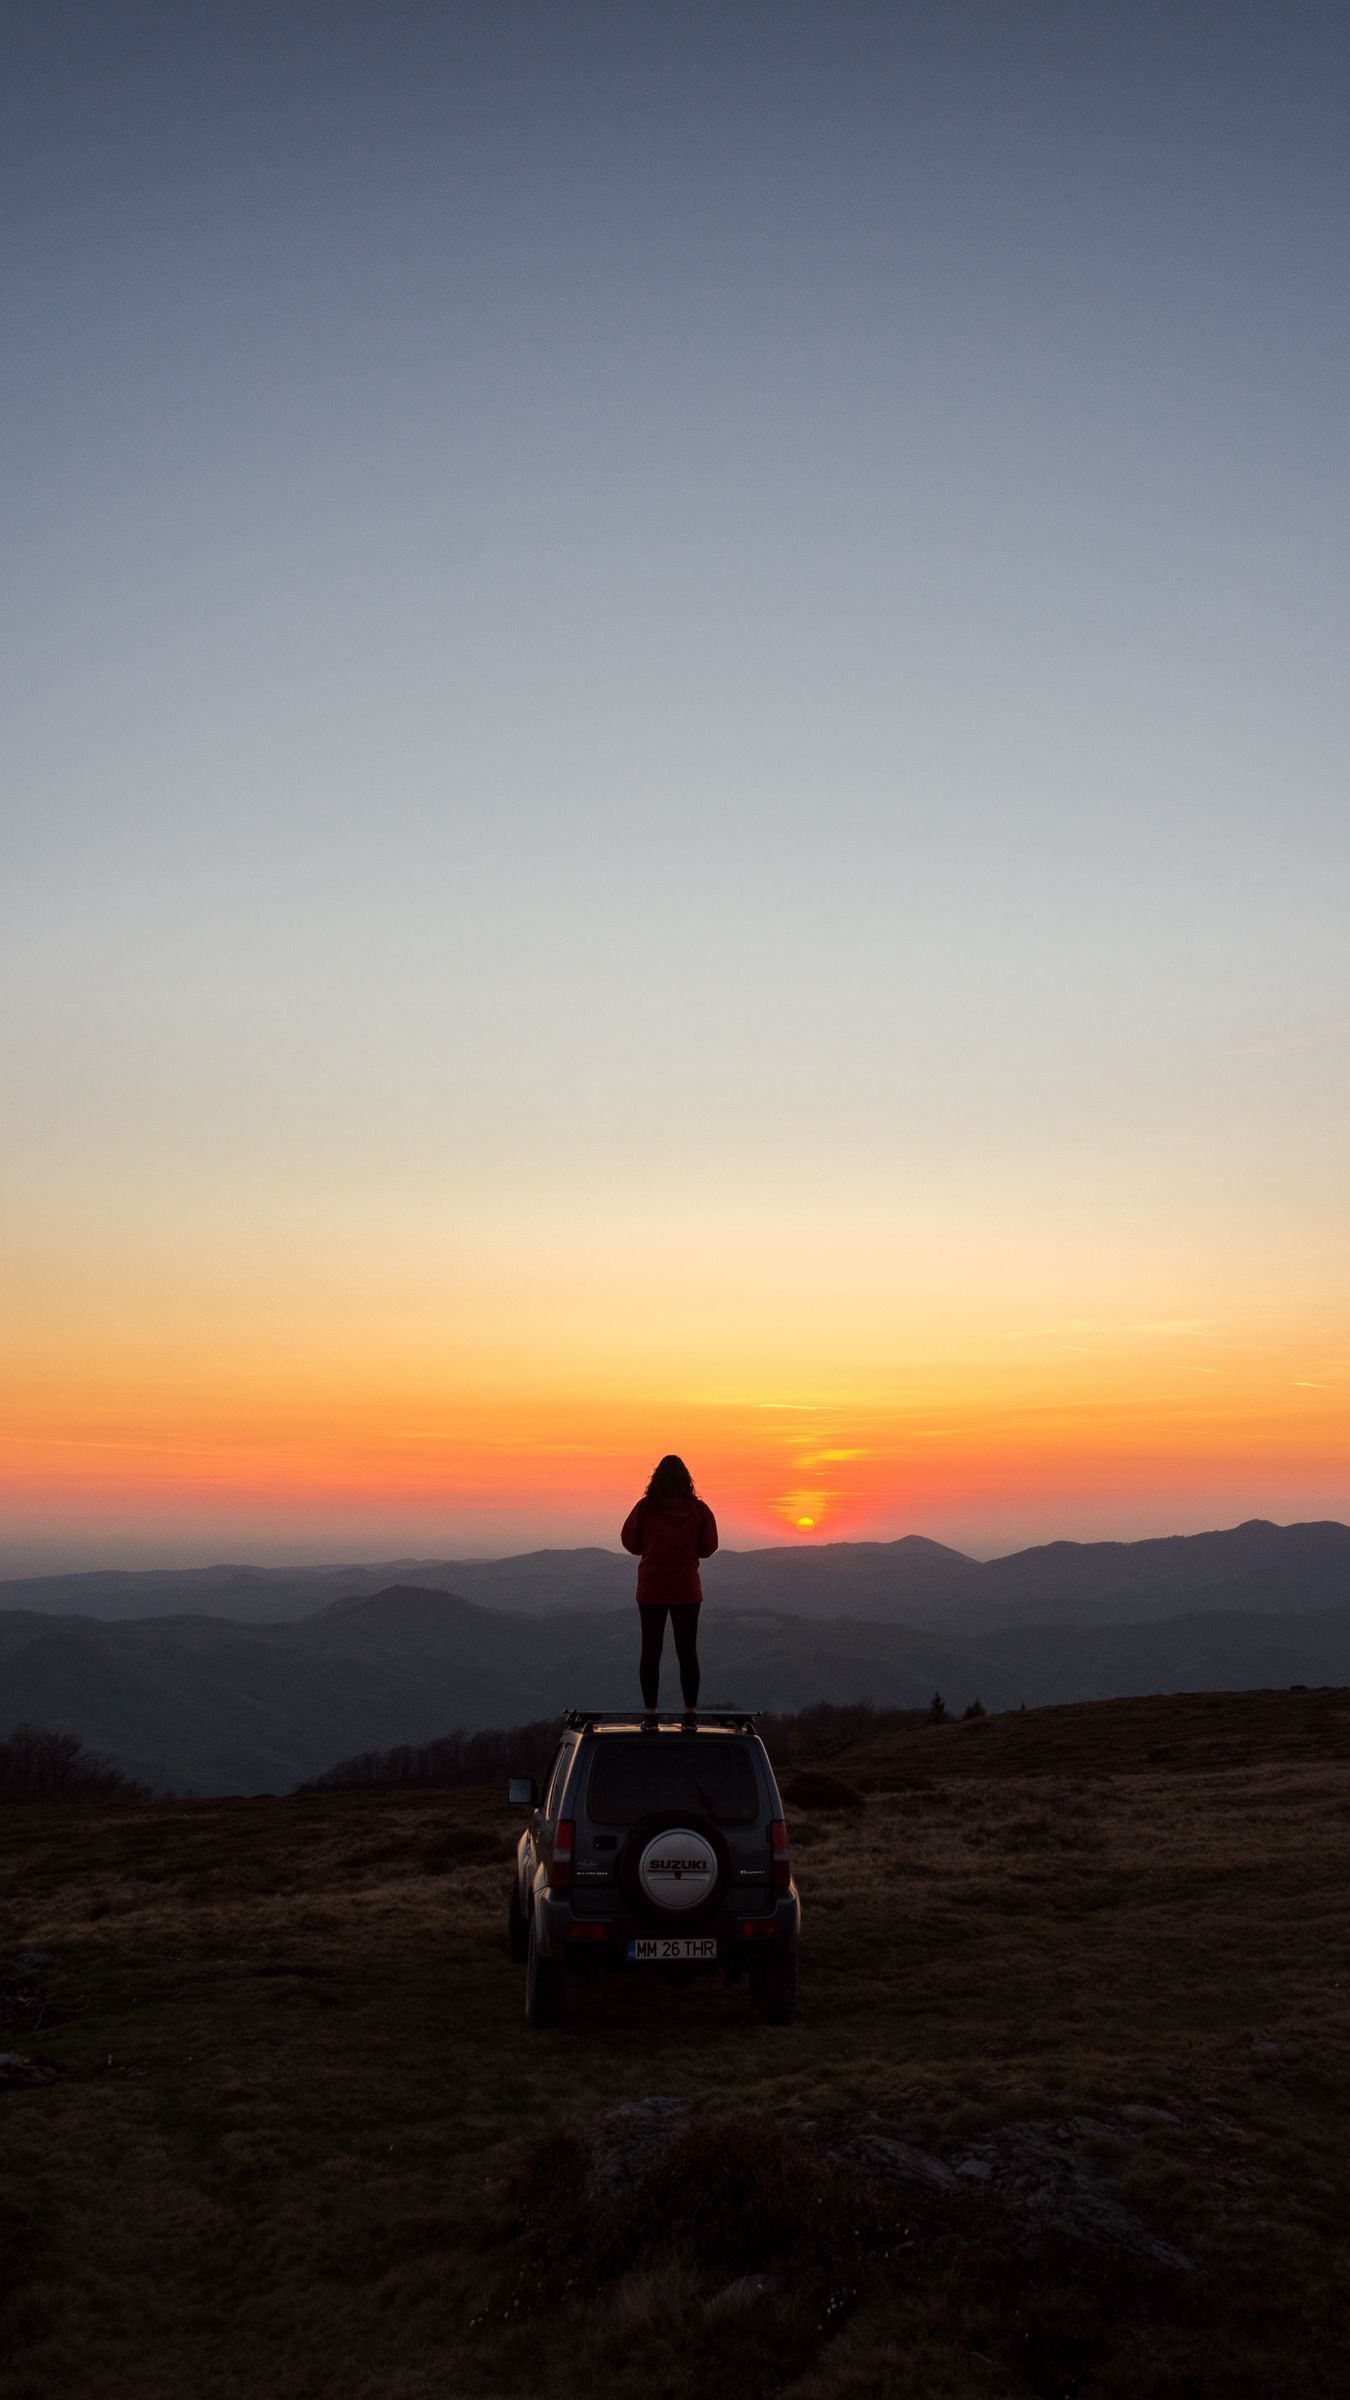 Download wallpaper 1350x2400 car, person, sunset, mountains